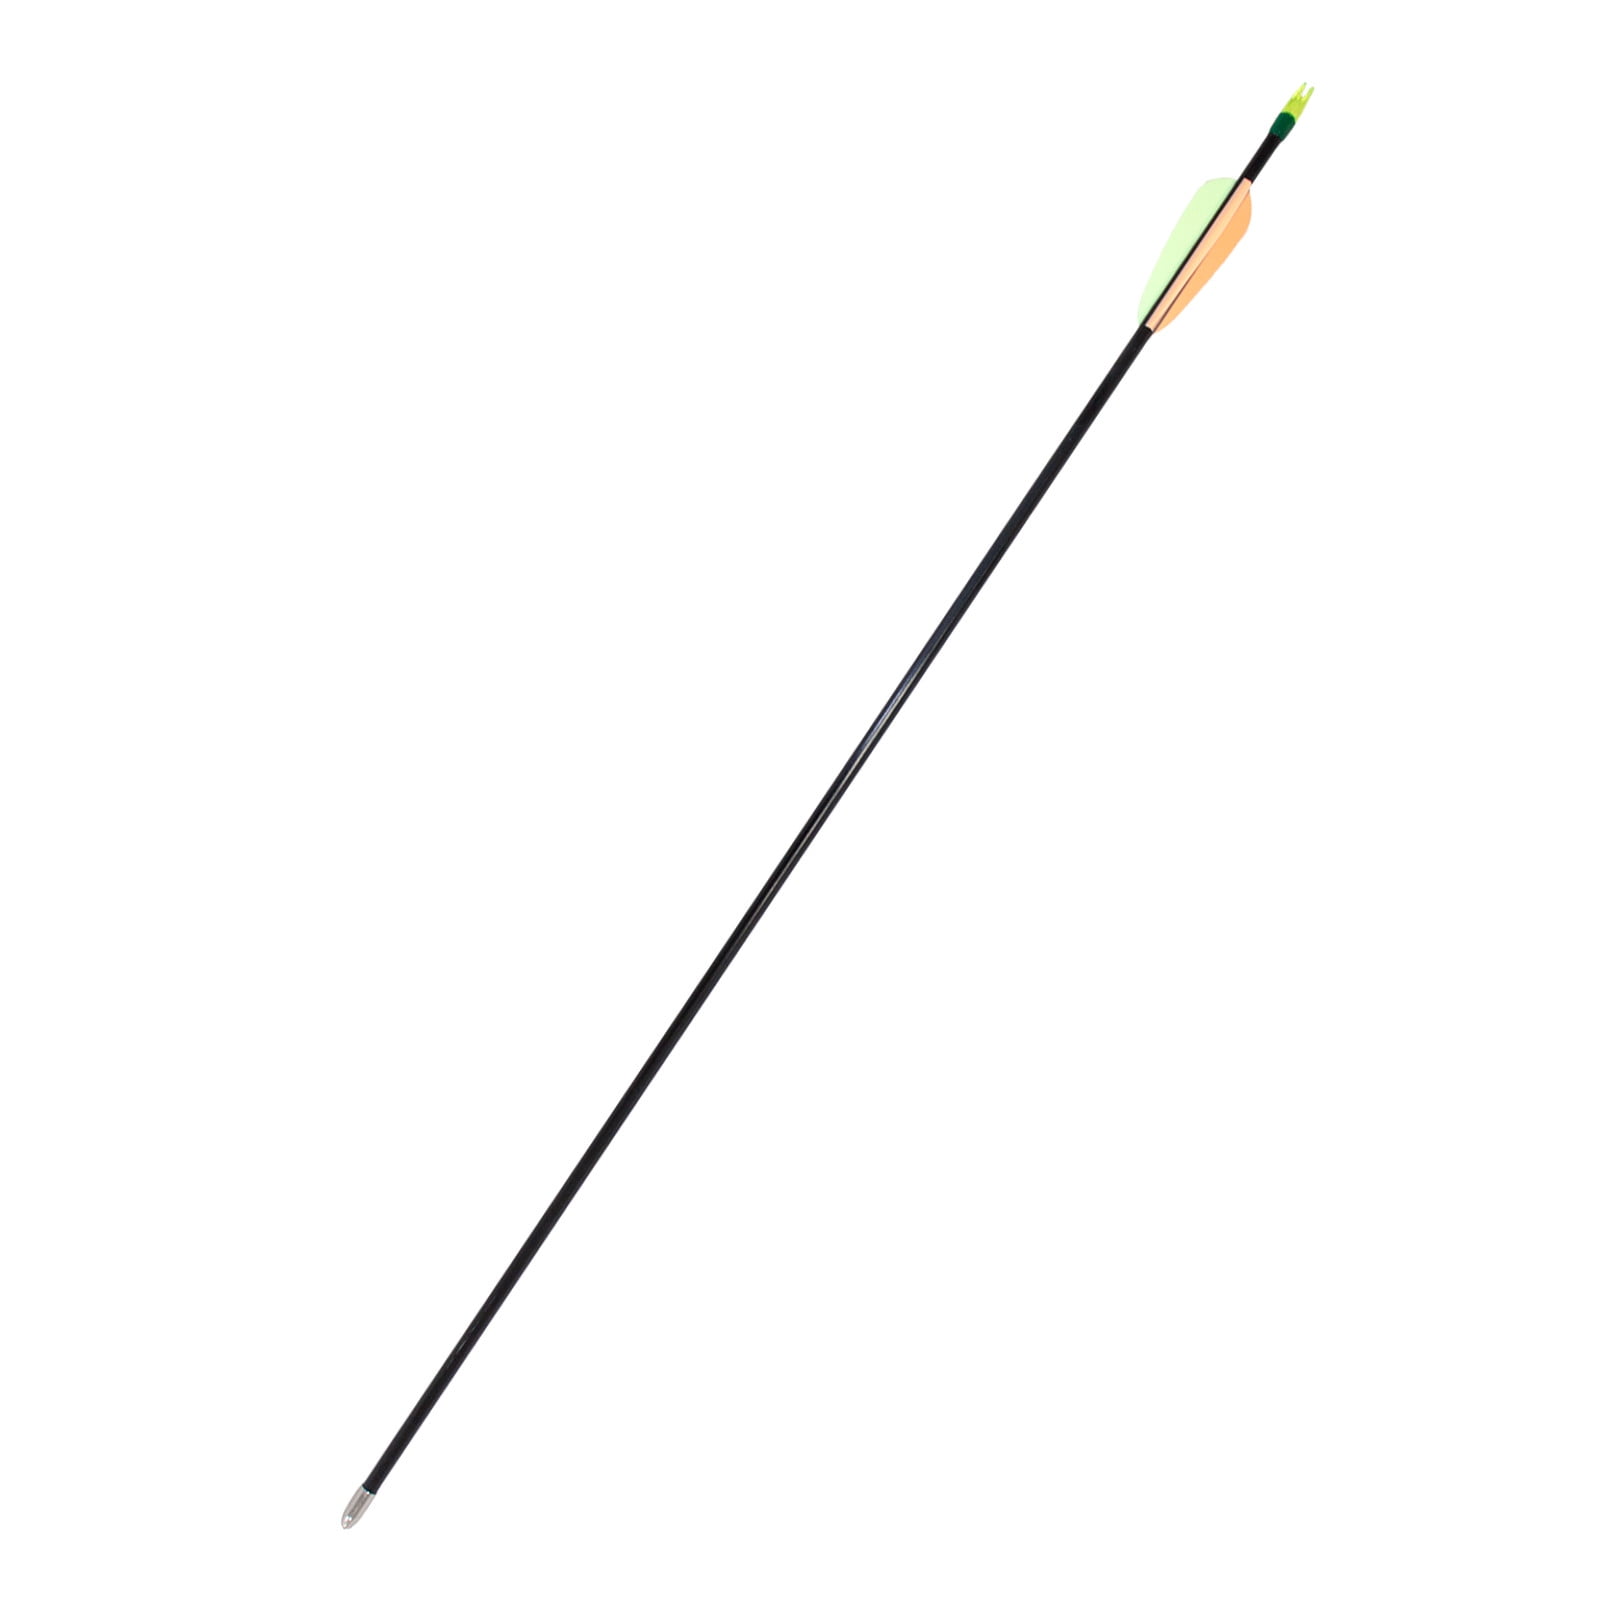 Practice Arrows Or Youth Arrows for Recurve Bow & Long Bow 12 Pack GPP outdoor GPP 28 Fiberglass Archery Target Arrows